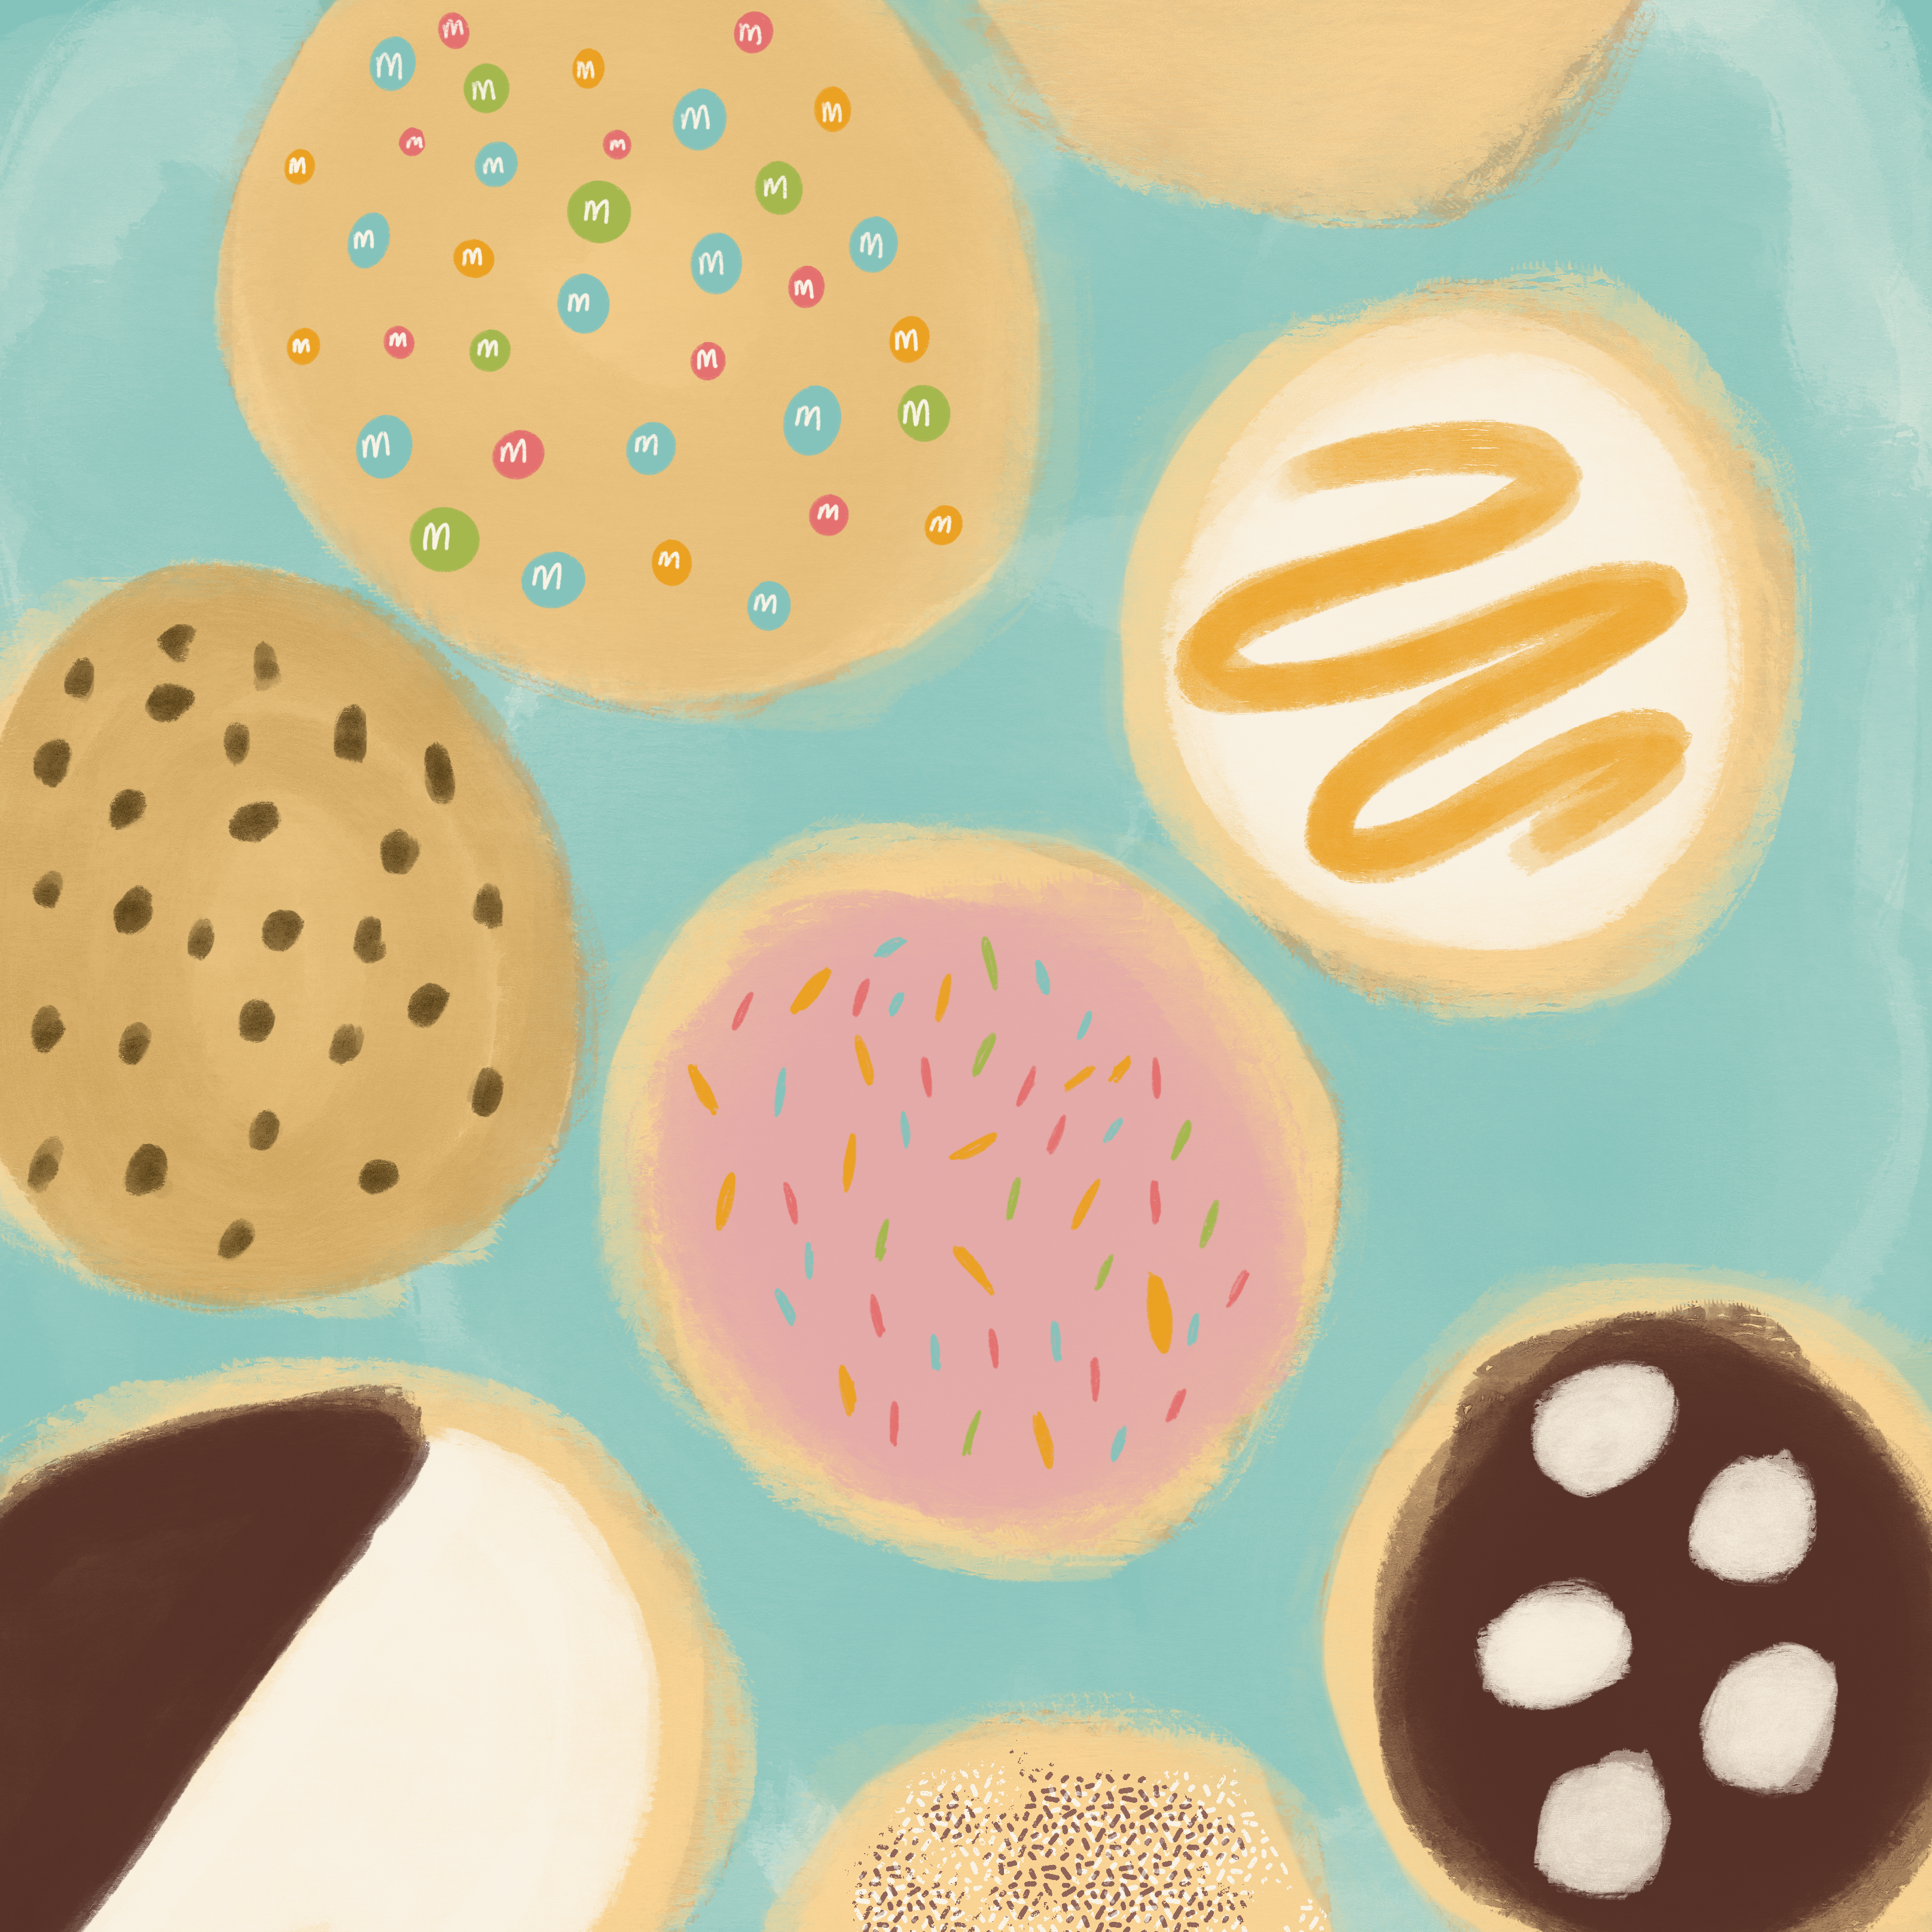 This graphic has a light blue background covered with a variety of different cookies. On the page, there is an M&M’s cookie with the classic bright-colored candies, a pink frosted cookie with colored sprinkles, a white frosted cookie with a caramel squiggle and a classic chocolate chip cookie.